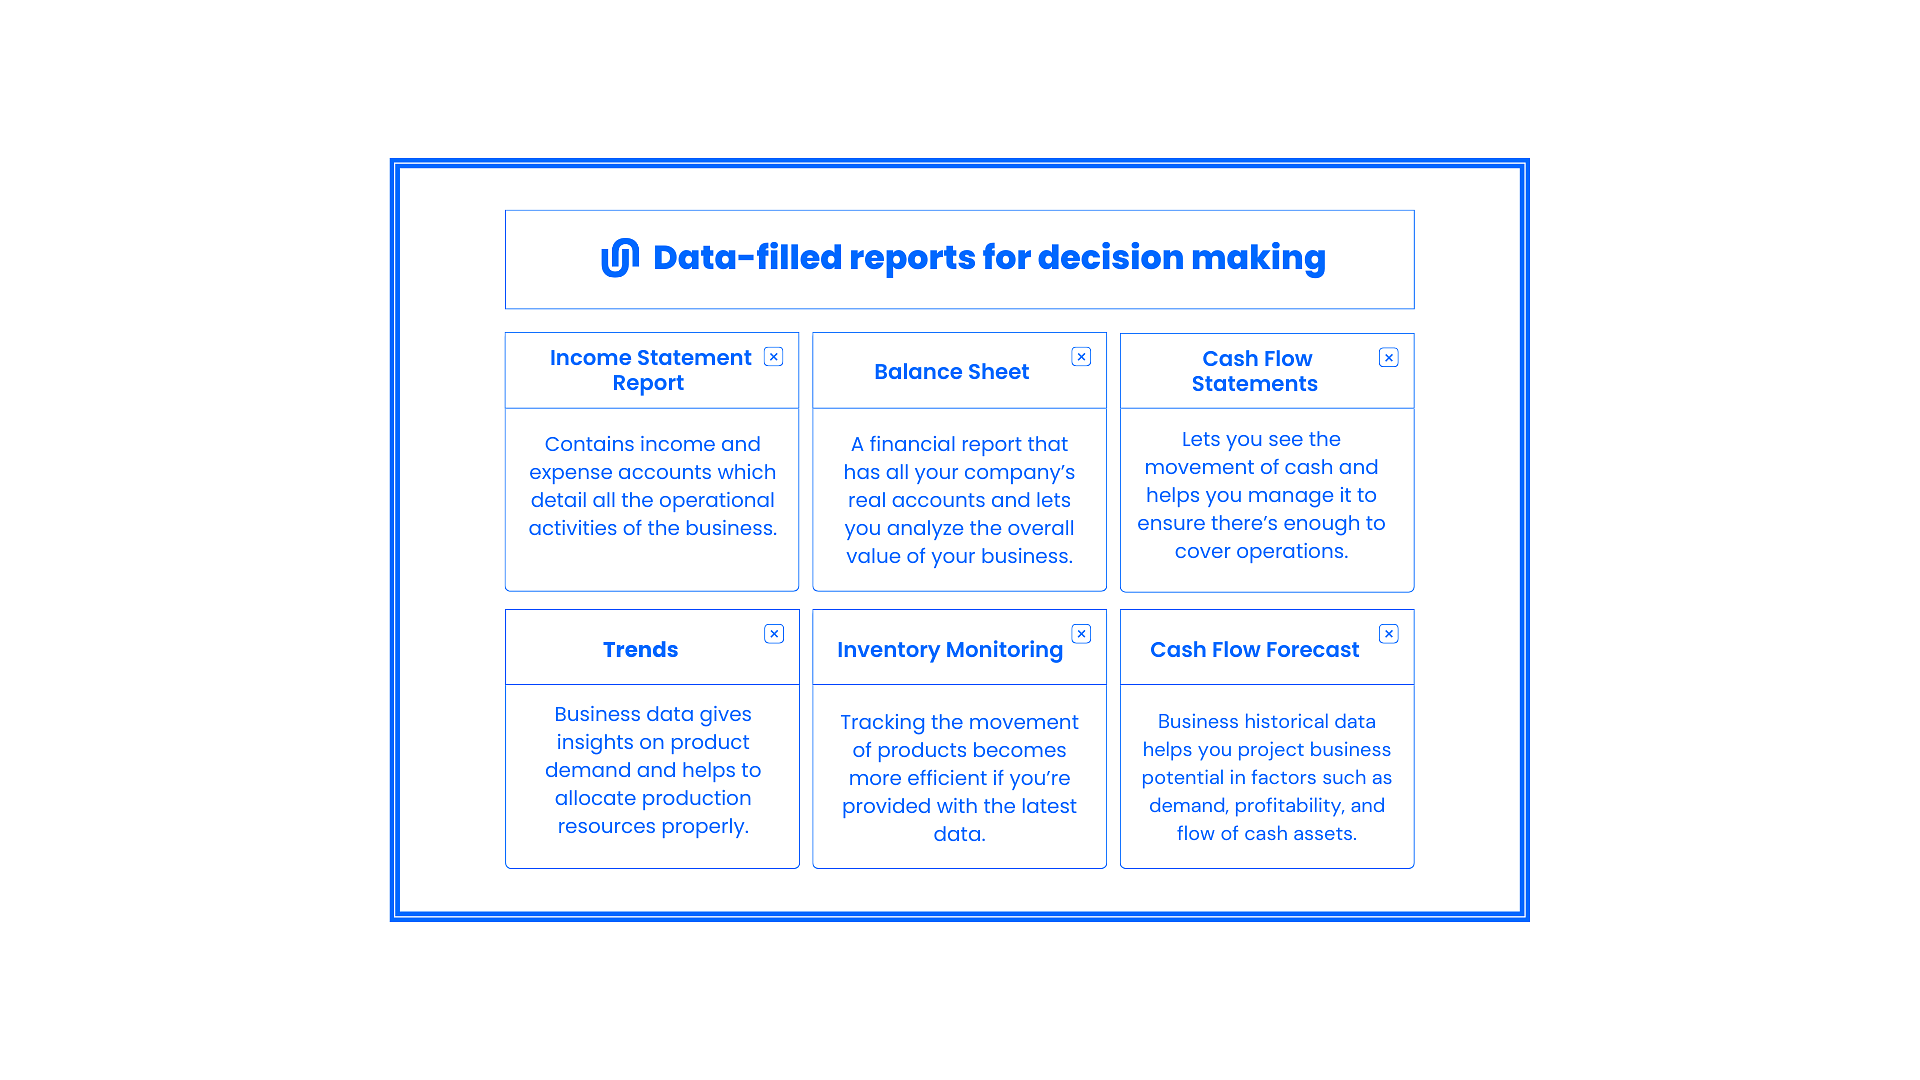 An infographic about data-filled reports for decision making: Income statement report, Balance sheet, Cash flow statements, Trends, Inventory monitoring, Cash flow forecast.